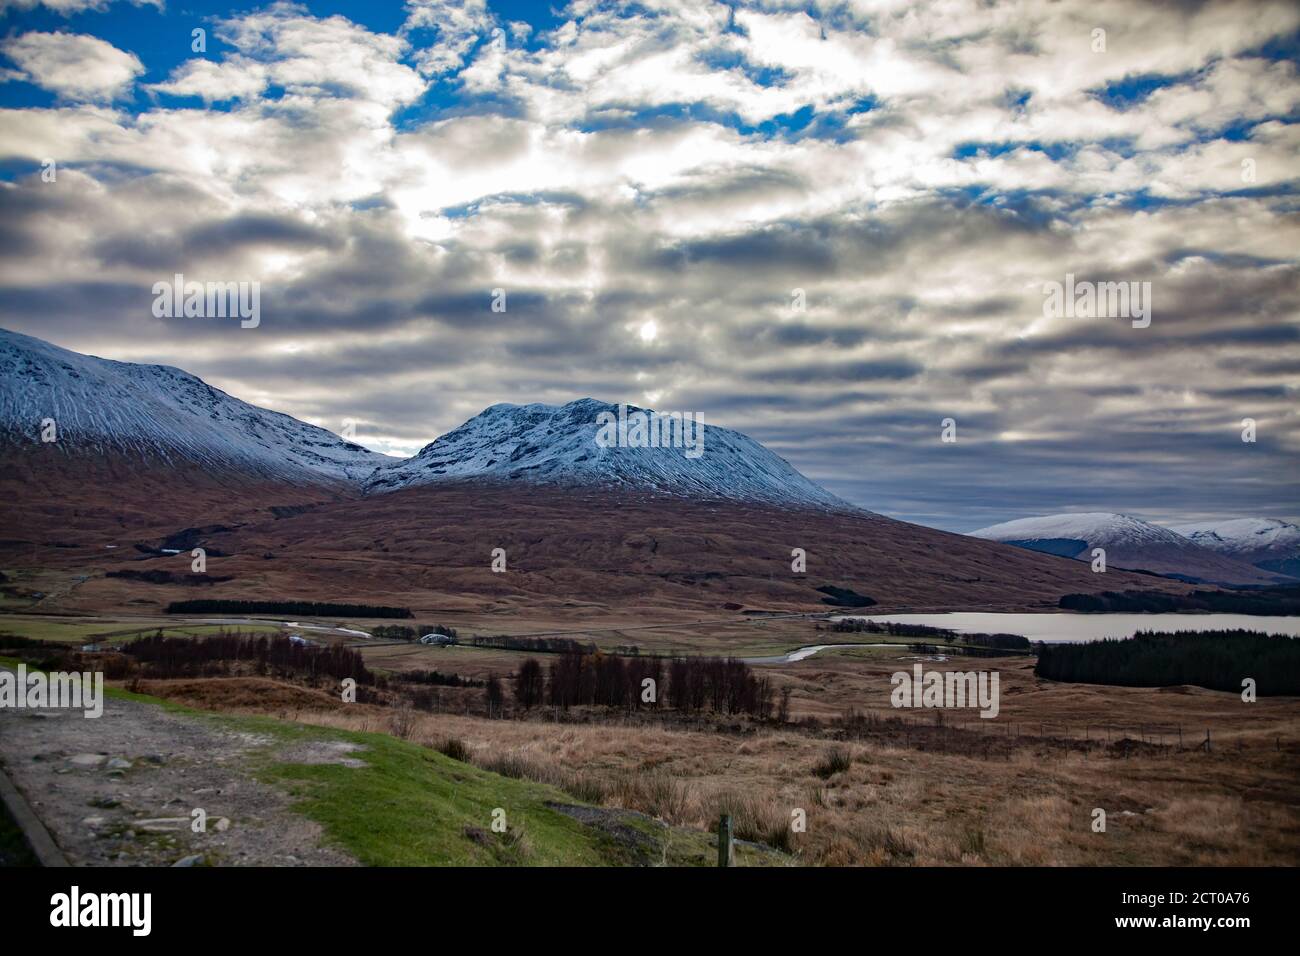 Scottish Highlands in fall. Rural view with river, lake, forest, house and mountains. Peaks with snow. Blue sky with clouds. Stock Photo